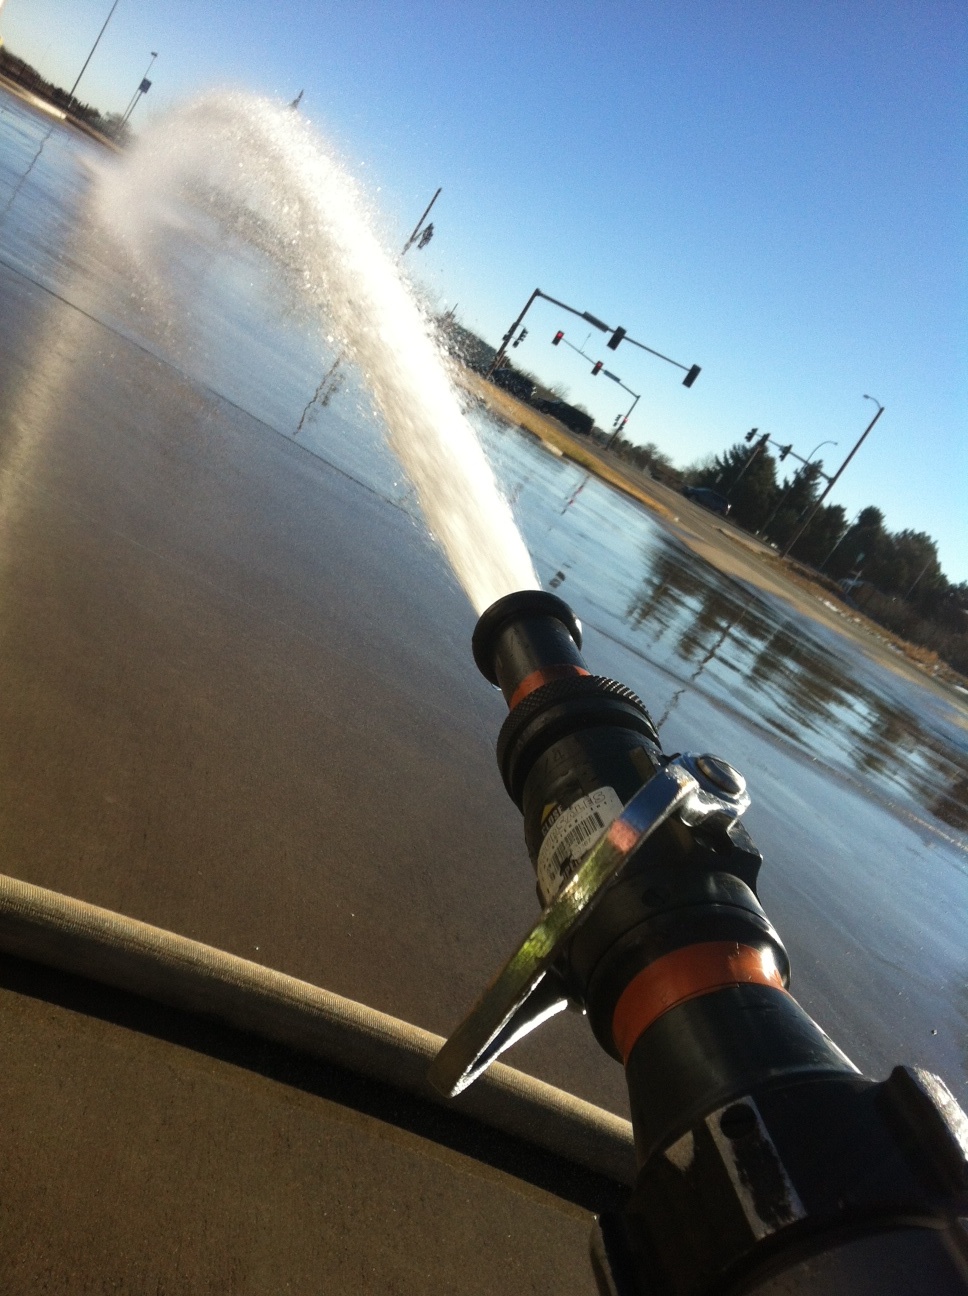 Fire hose nozzle firing stream of
                            water